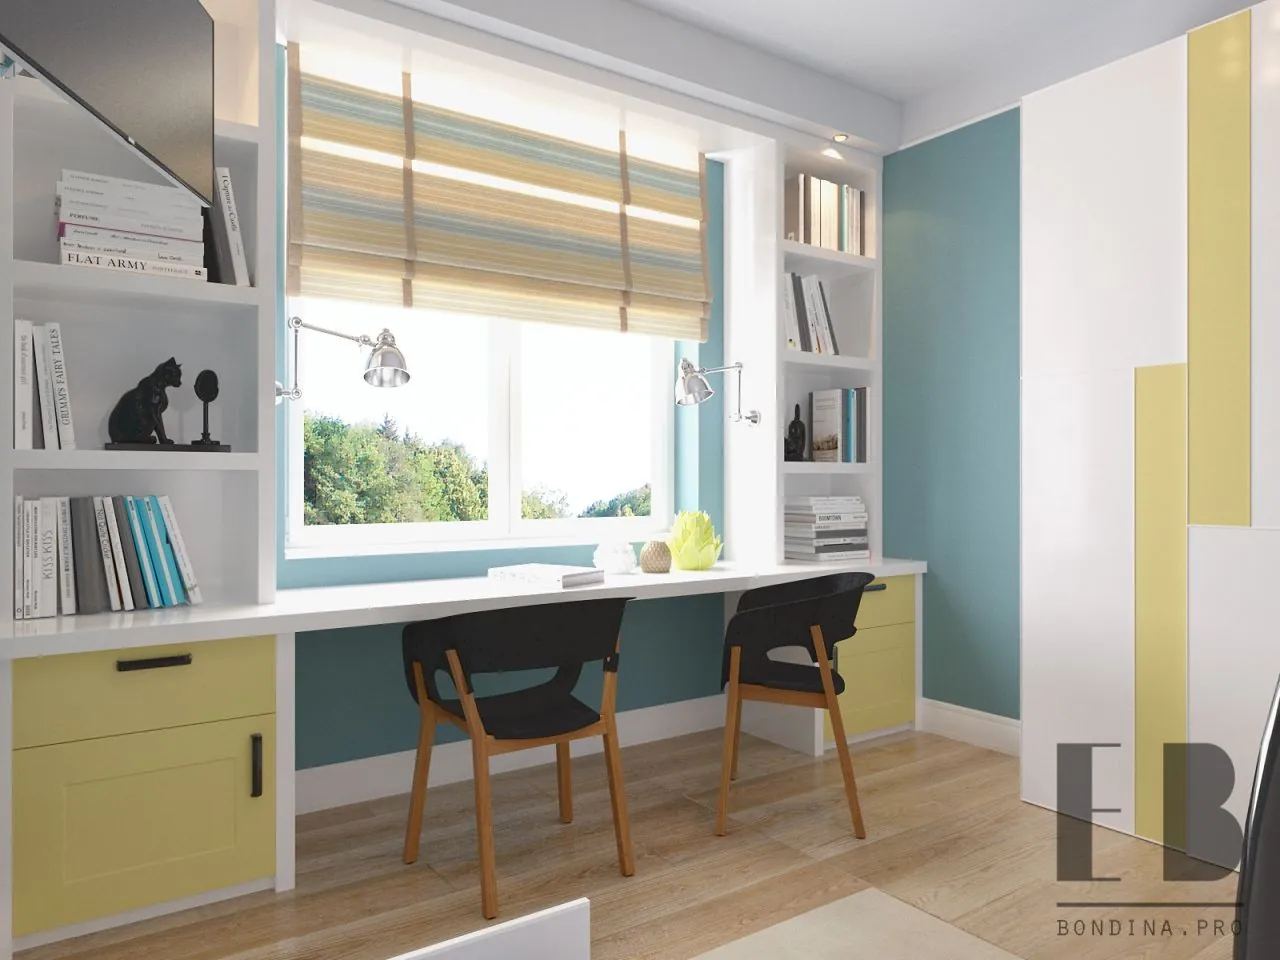 Boys room design with desk in front of the window